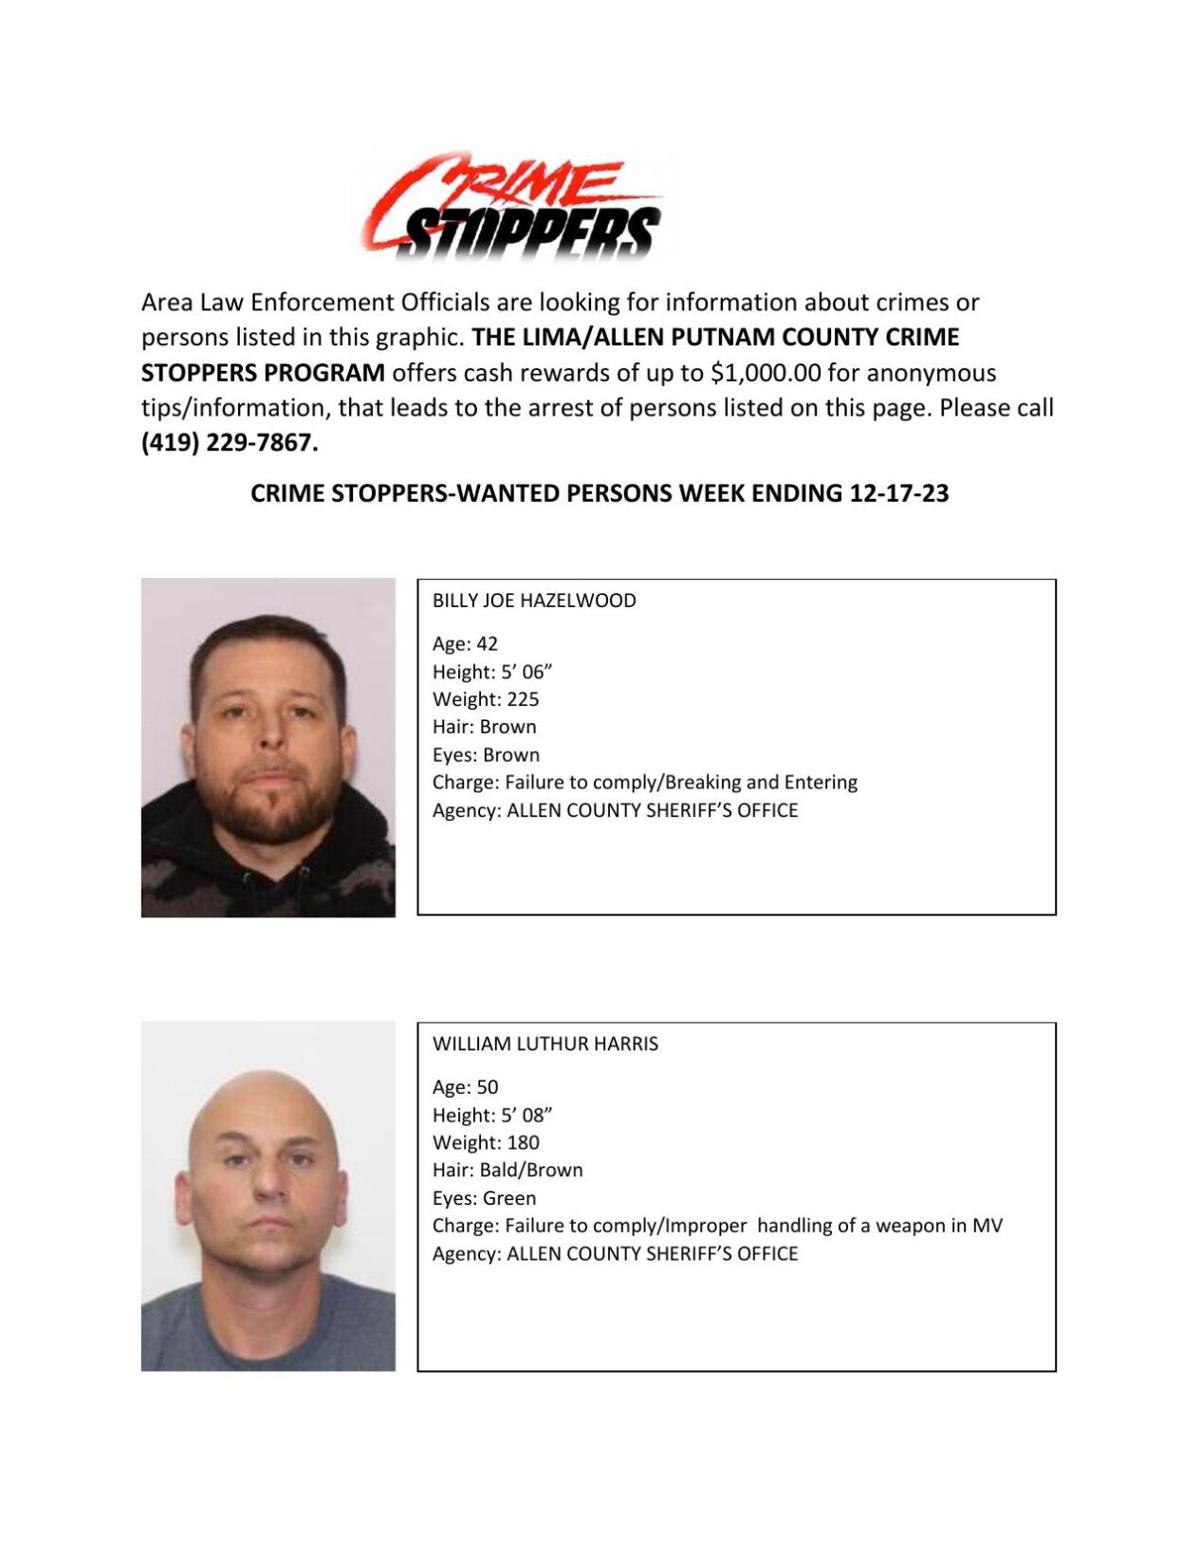 Lima/Allen-Putnam County Crime Stoppers Wanted Persons of the Week ...